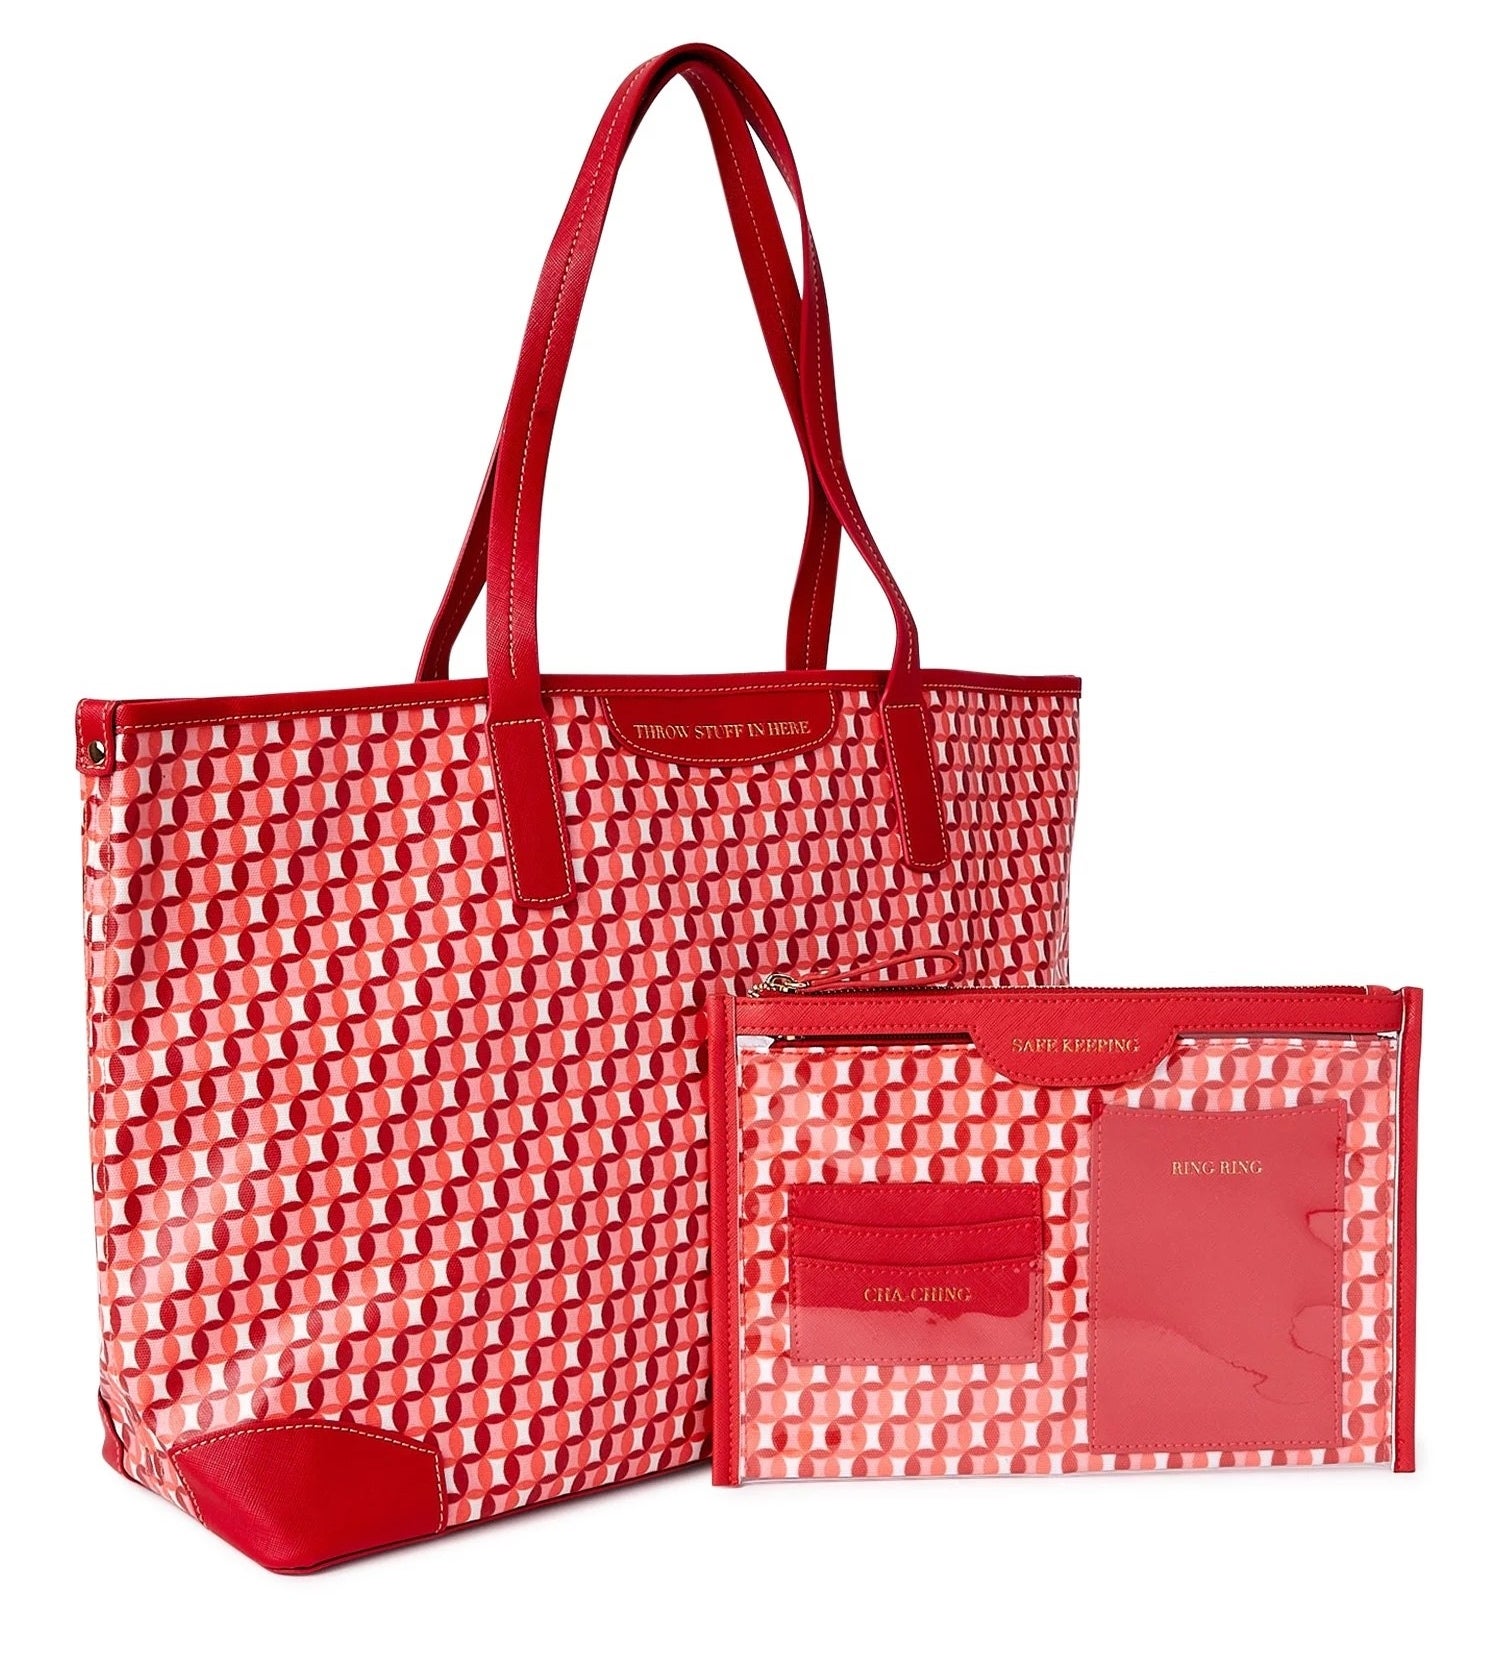 A red tote bag and matching red pouch